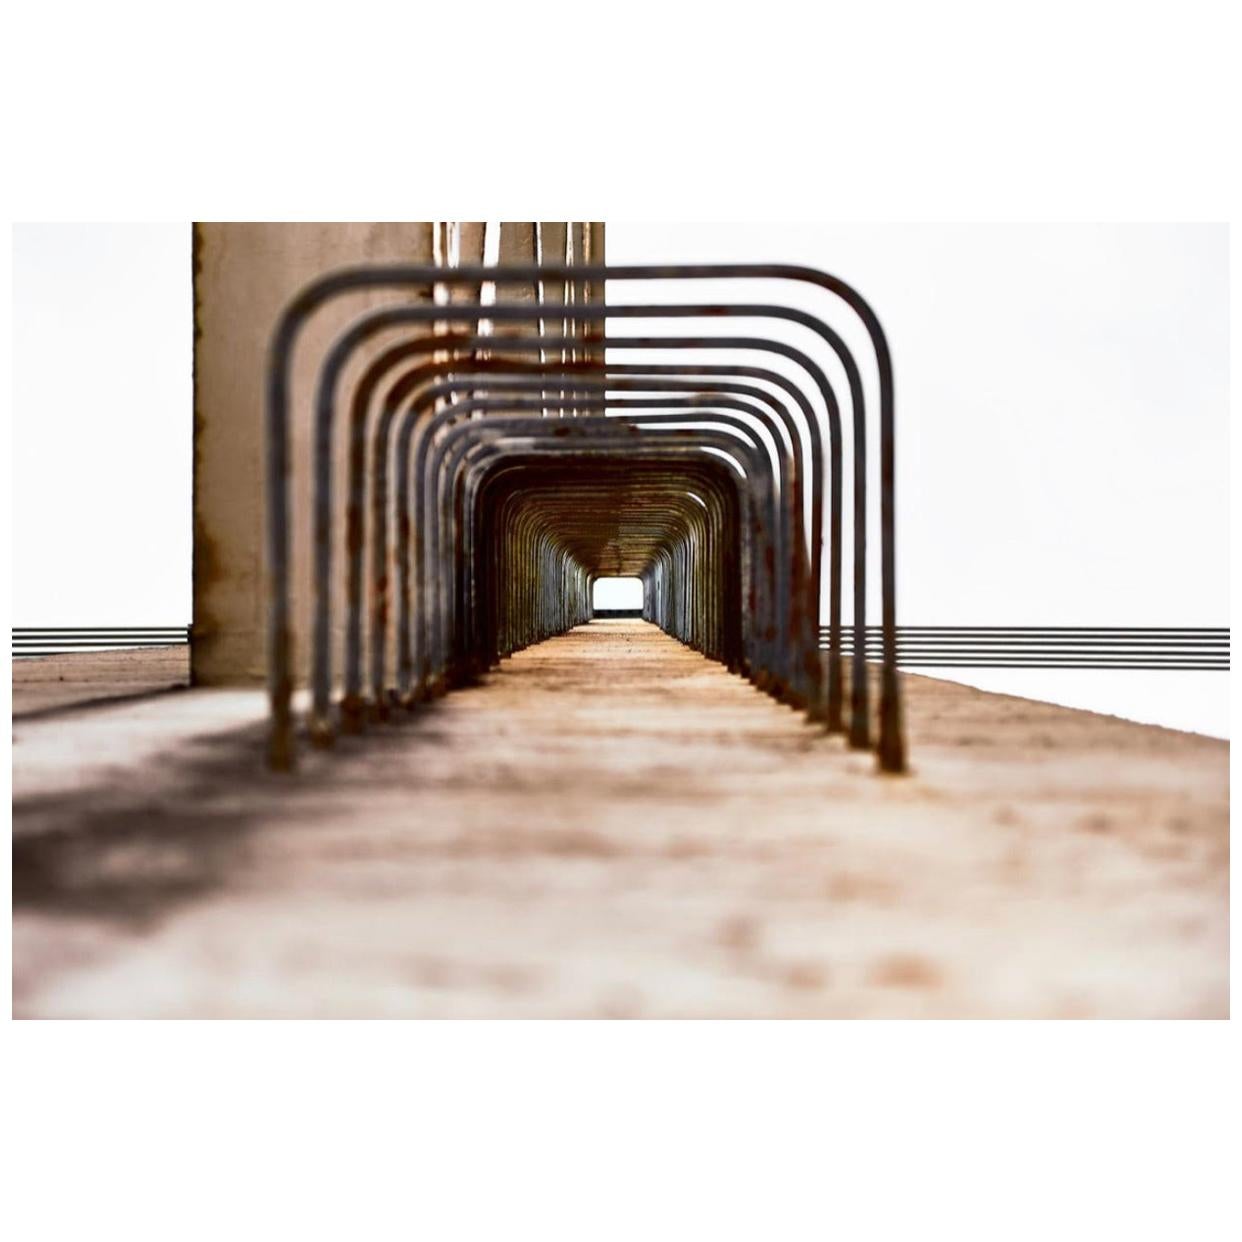 “Tunnel of Steps” Limited Edition Photograph by Cuco de Frutos